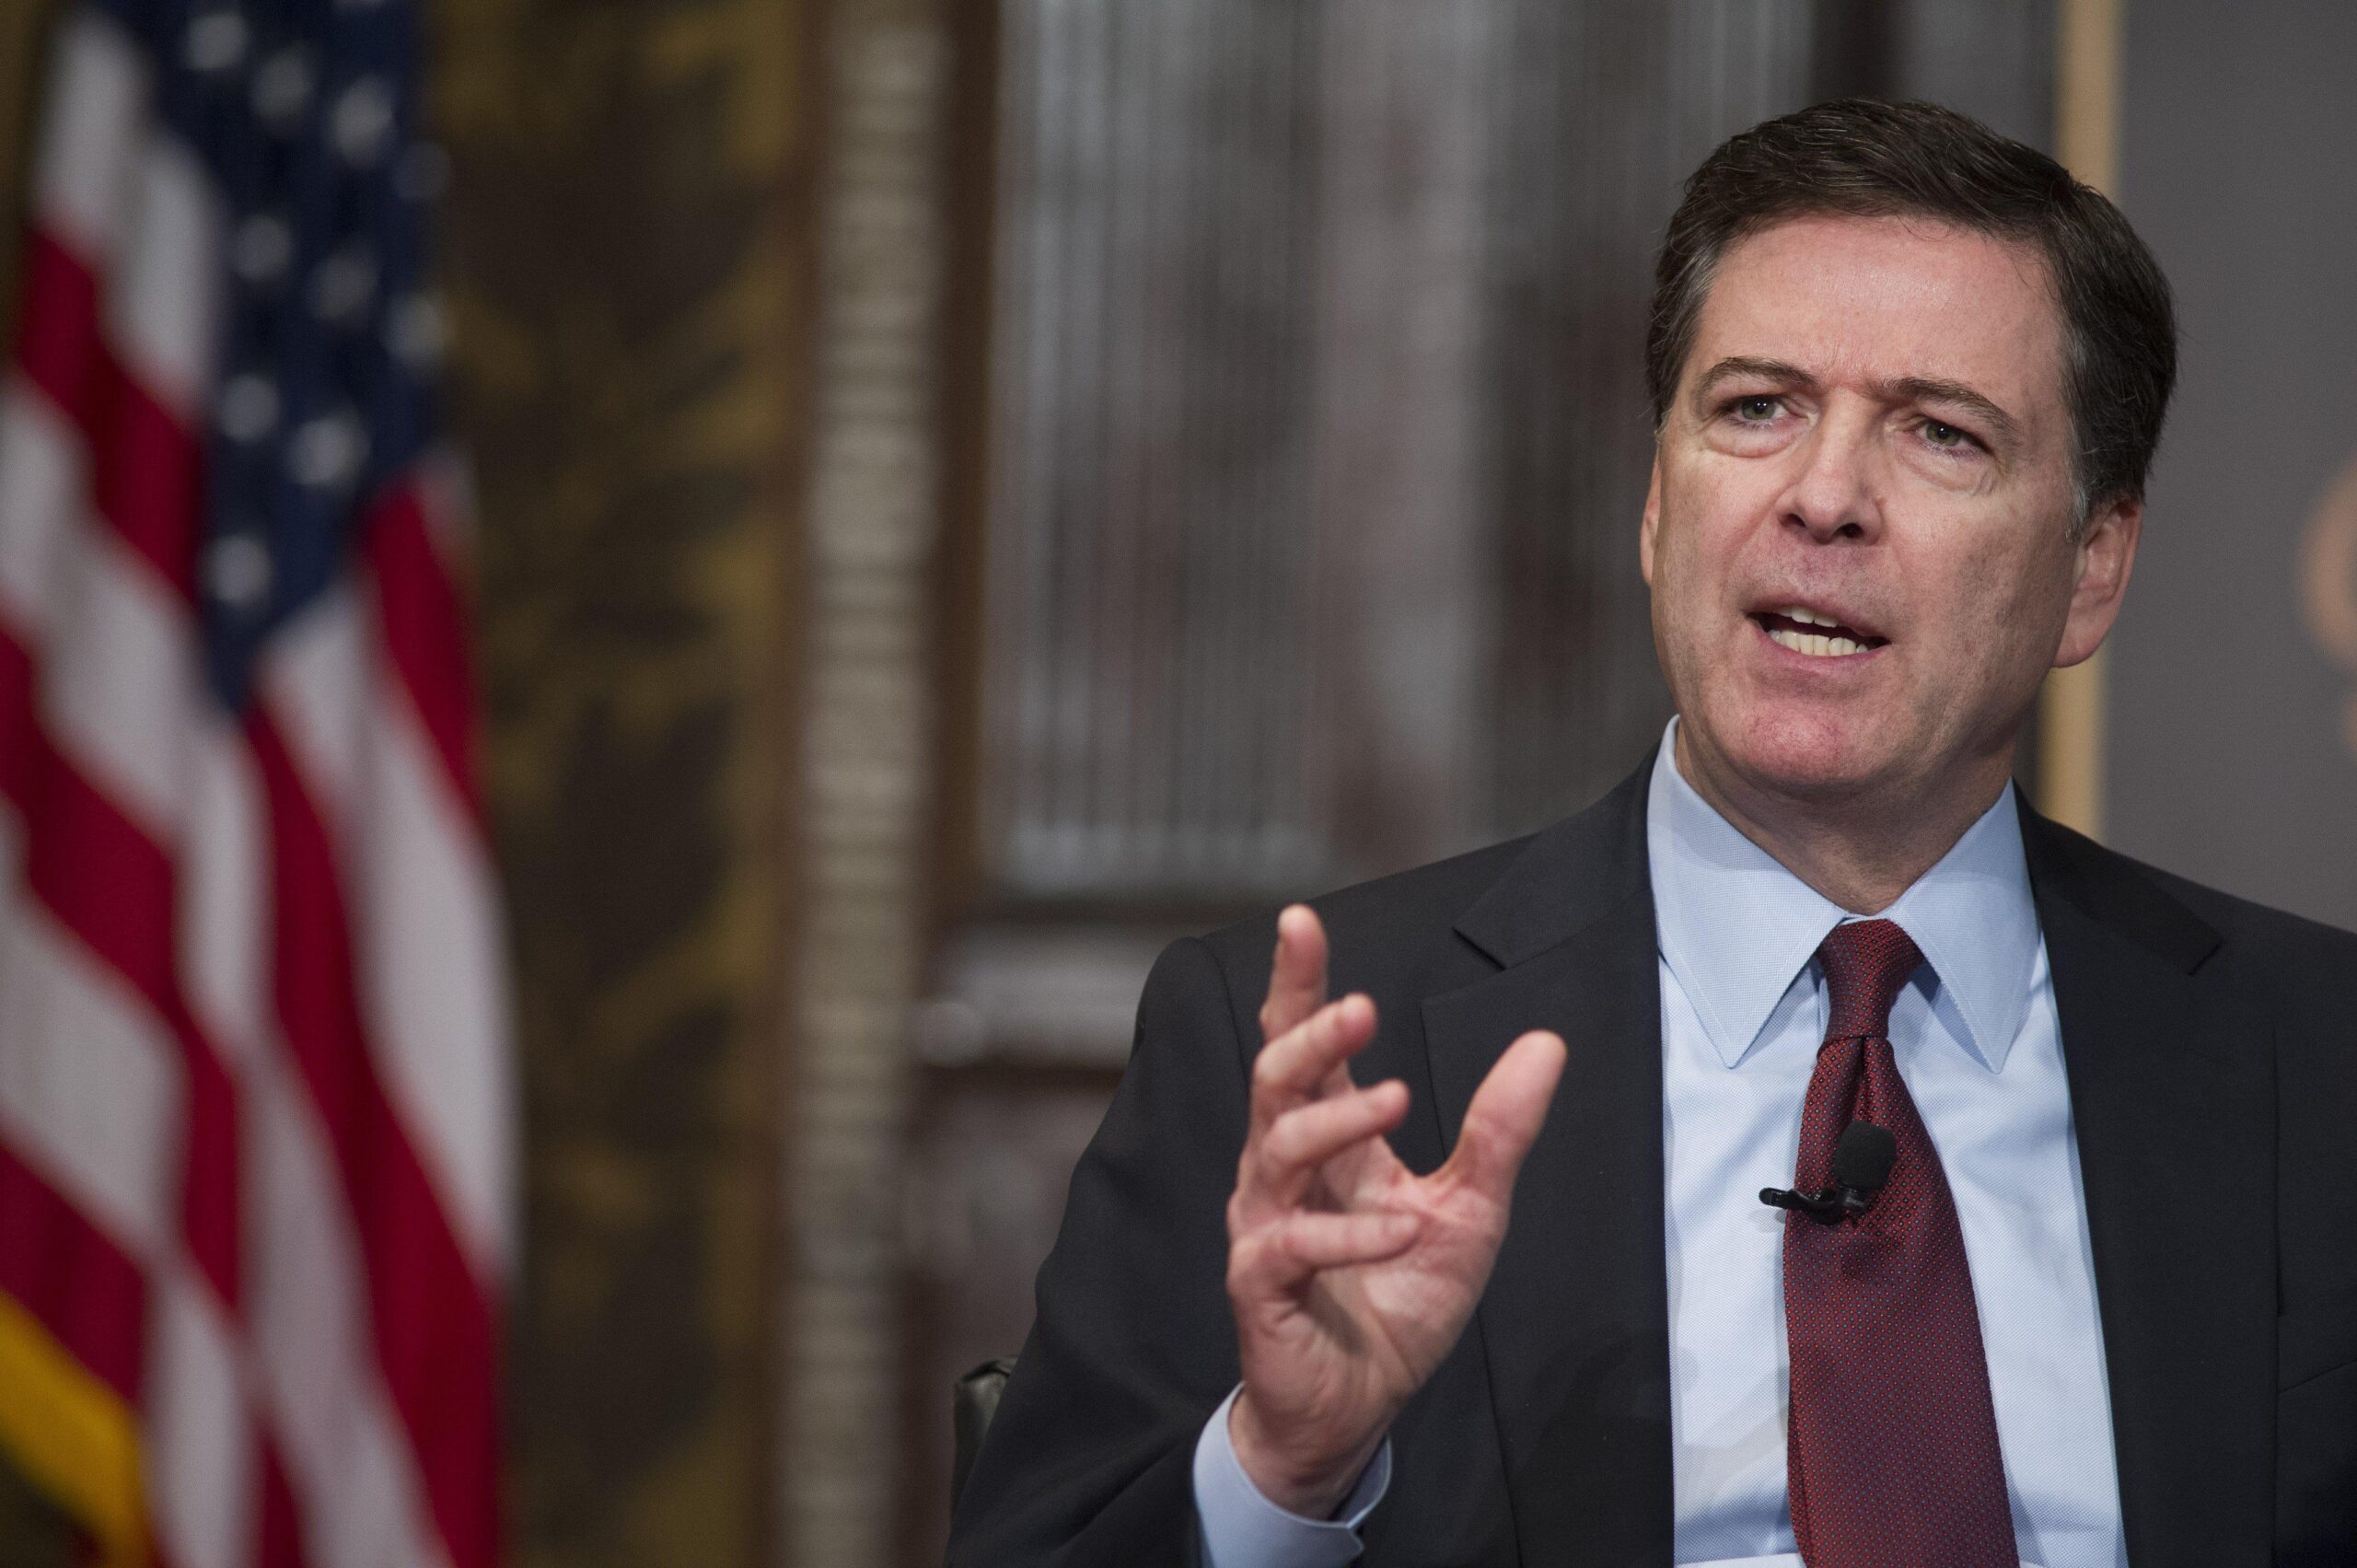 James Comey will Speak Publicly of the Russia Investigation Next Week